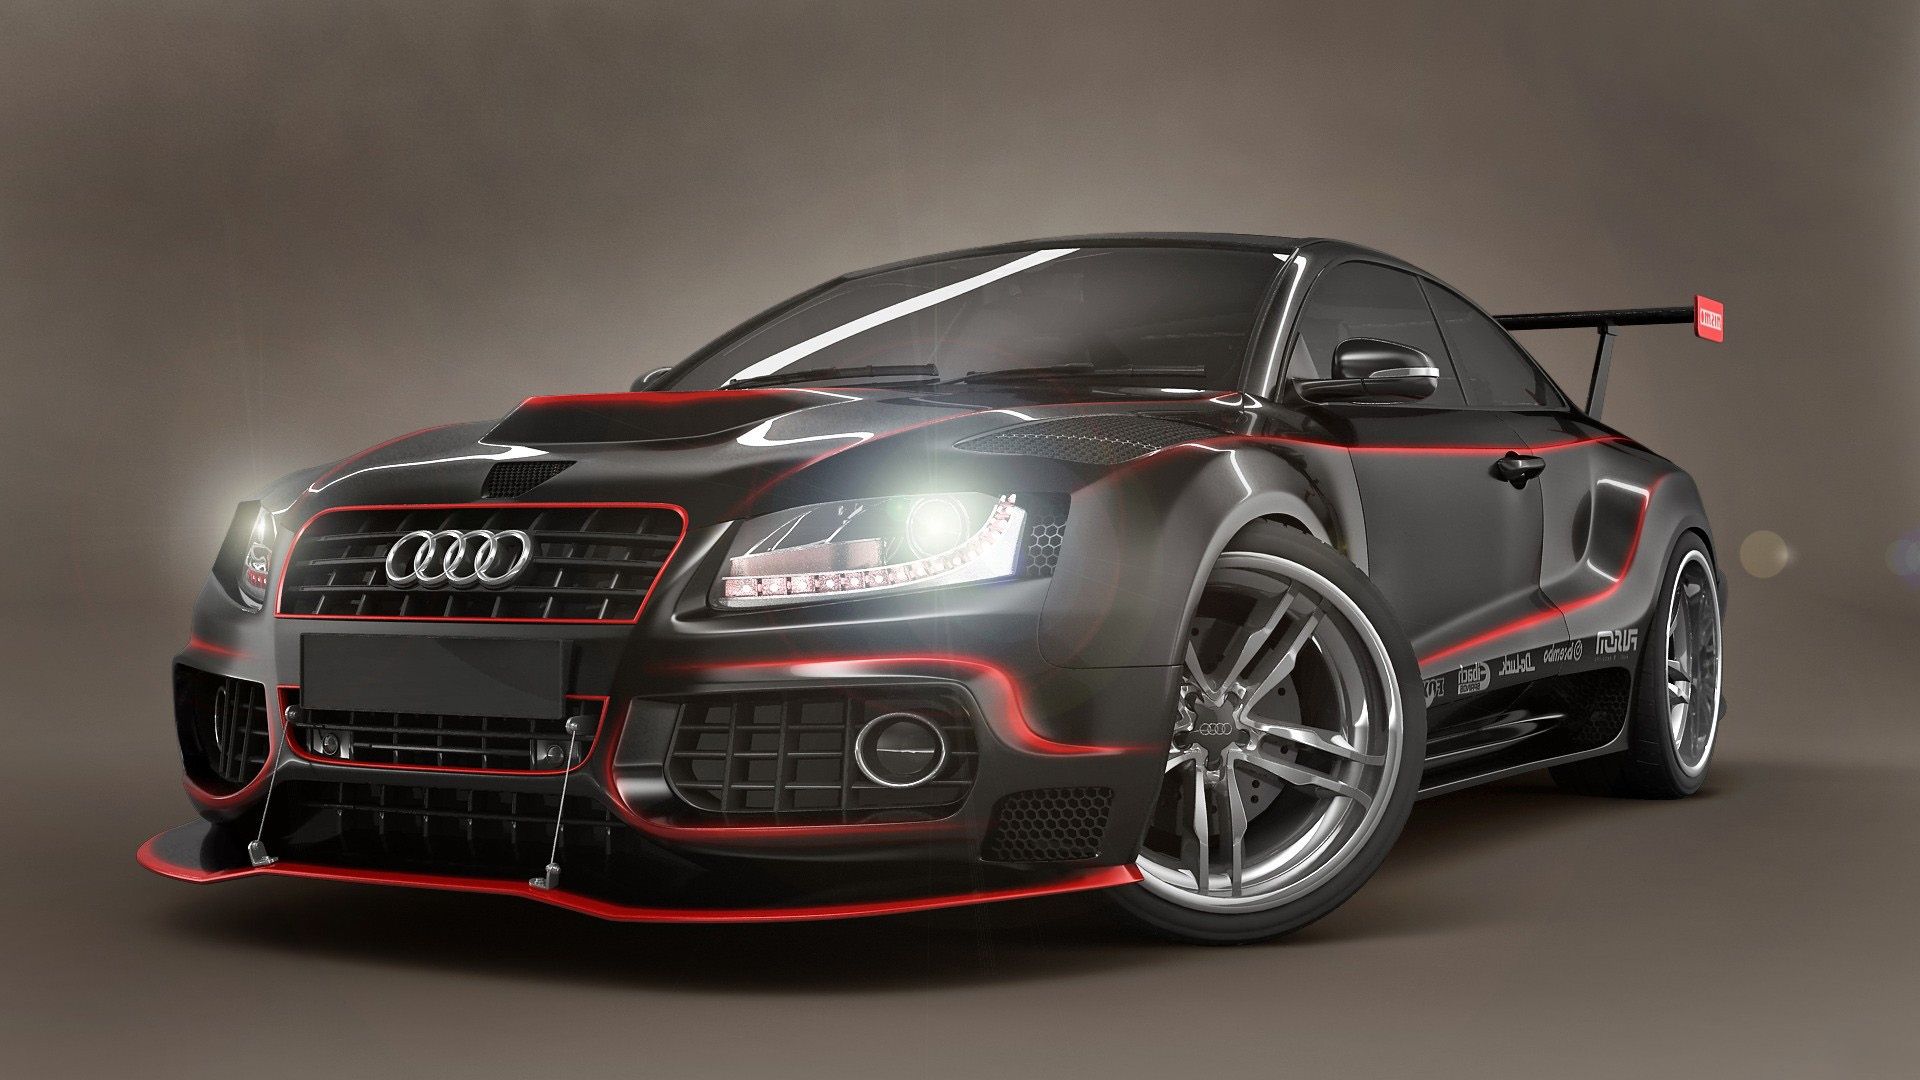 Audi Sports Car Wallpapers Mobile - Epic Wallpaperz